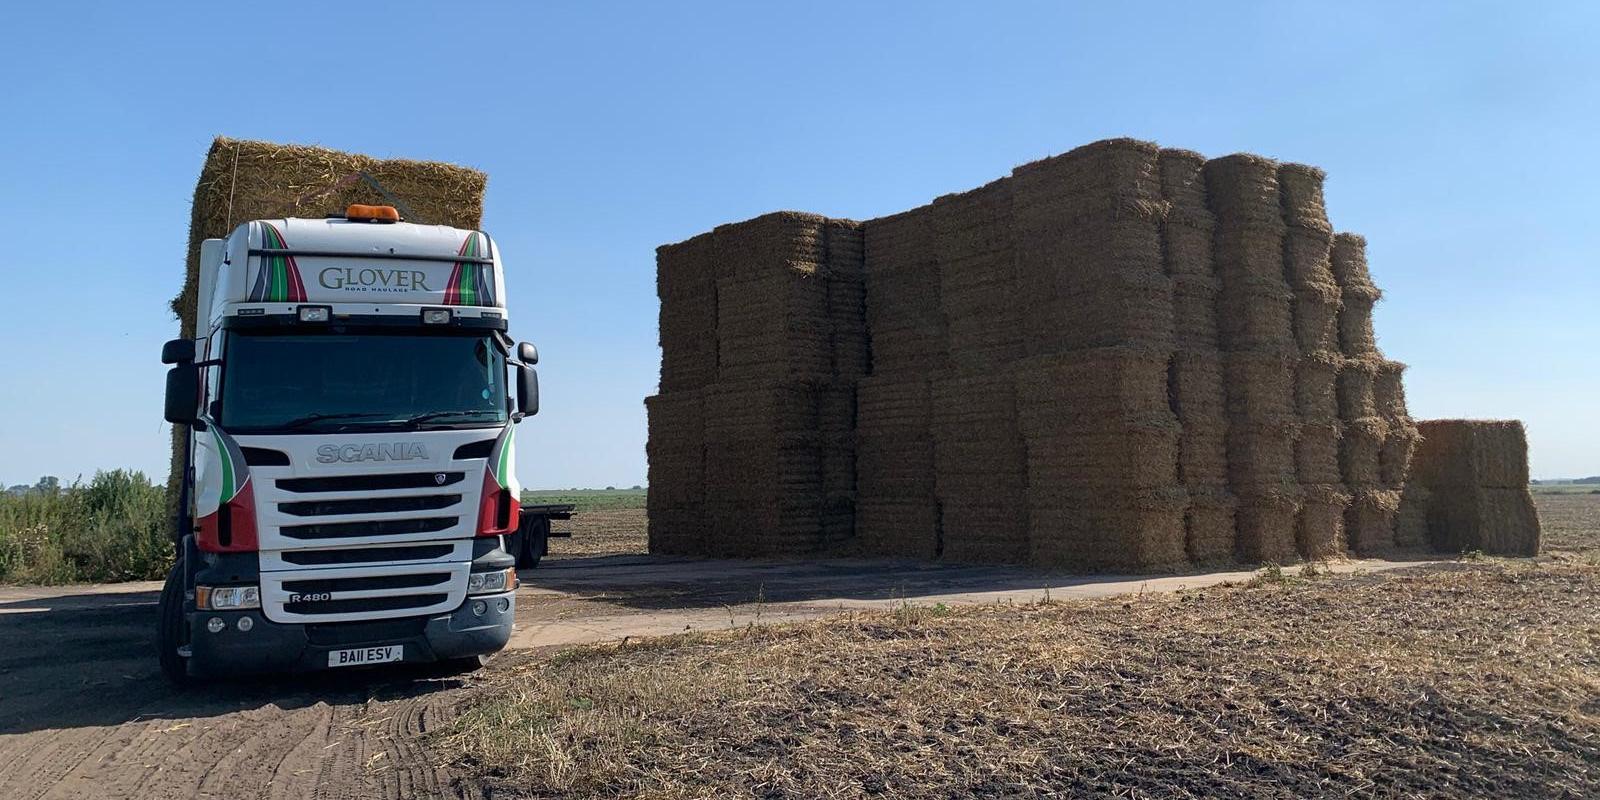 Glover Haulage lorry ready to transport stacked bales